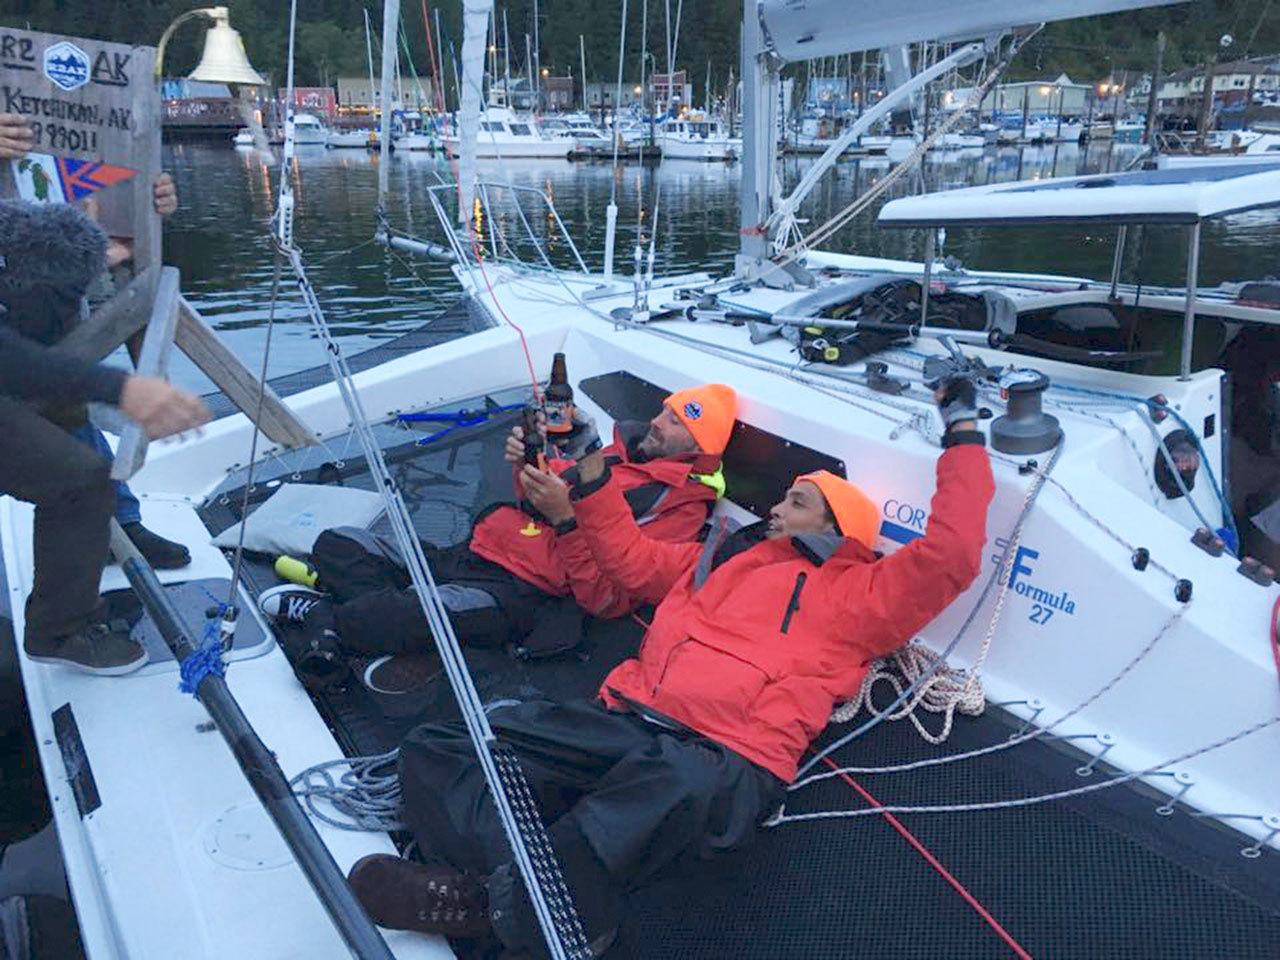 Zach Tapac and Spike Kane celebrate their arrival in Ketchikan after unofficially completing the Race to Alaska in 2016. Tapac and Kane were part of the original Team Alula crew and are both paralyzed from their armpits down due to neck injuries. (Daniel Evens/R2AK)